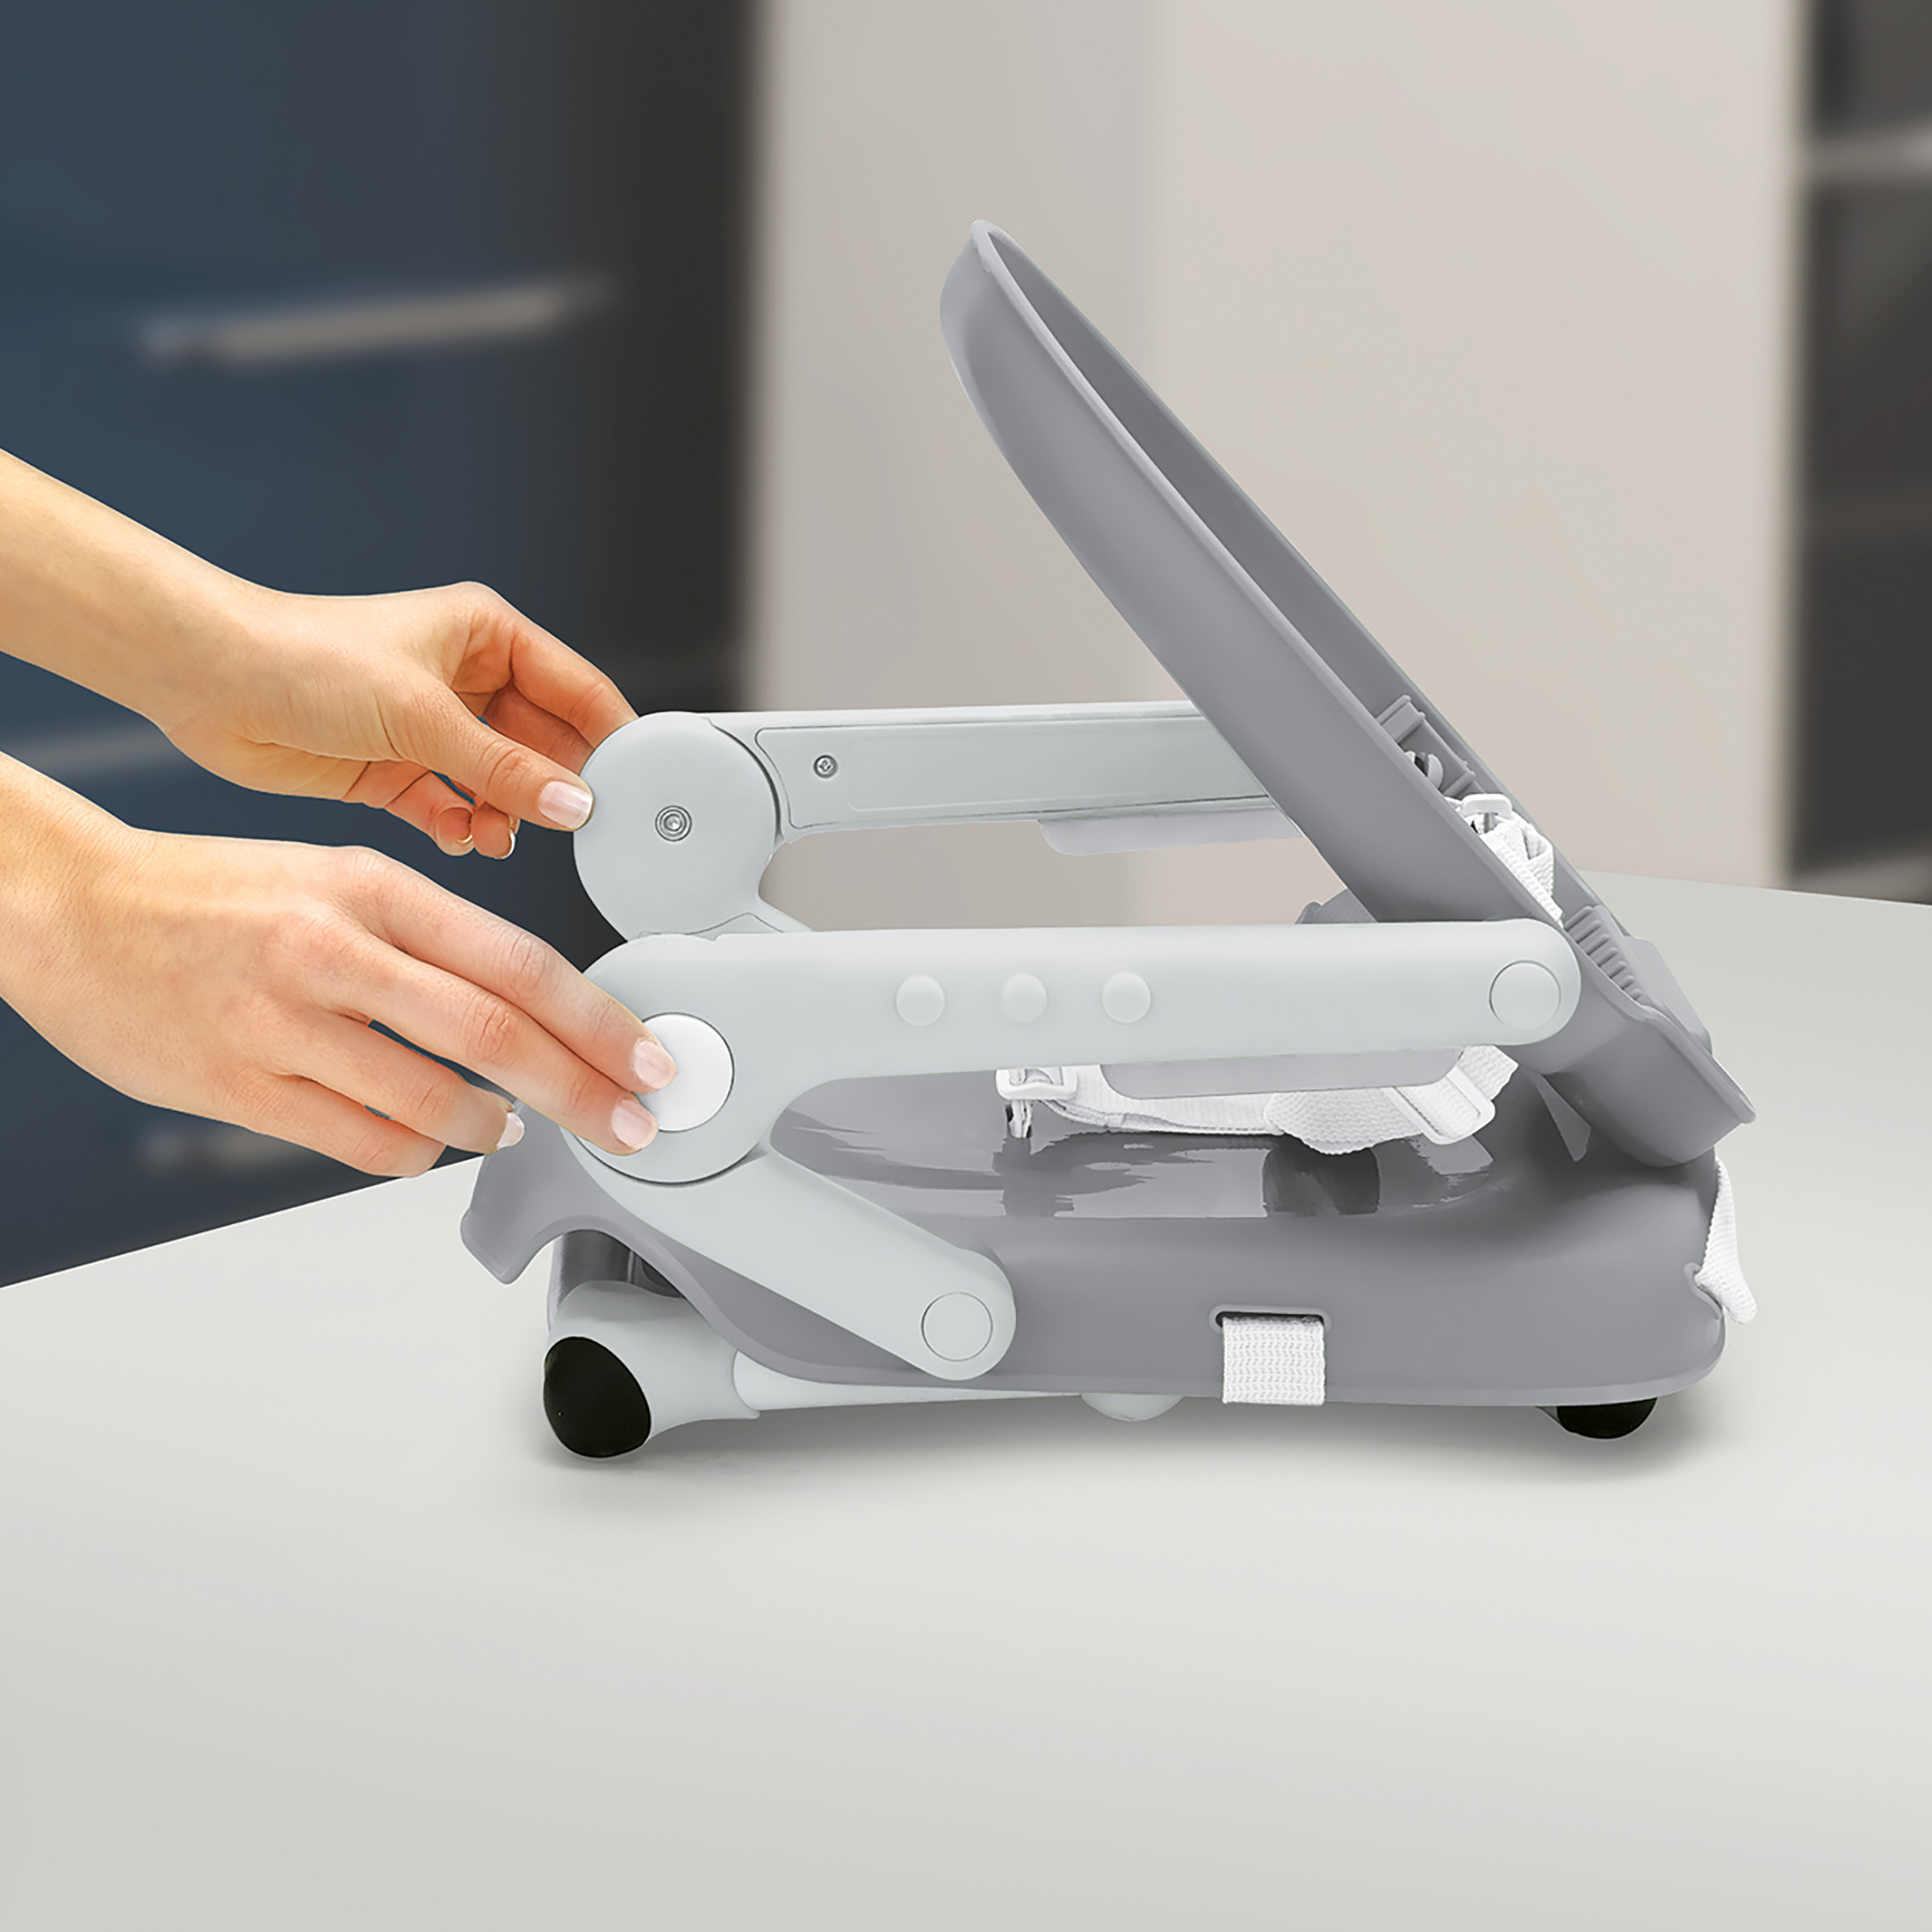 Chicco Pocket Snack Booster Seat for Babies and Toddlers with Removable Tray - Grey (Grey) - image 3 of 7